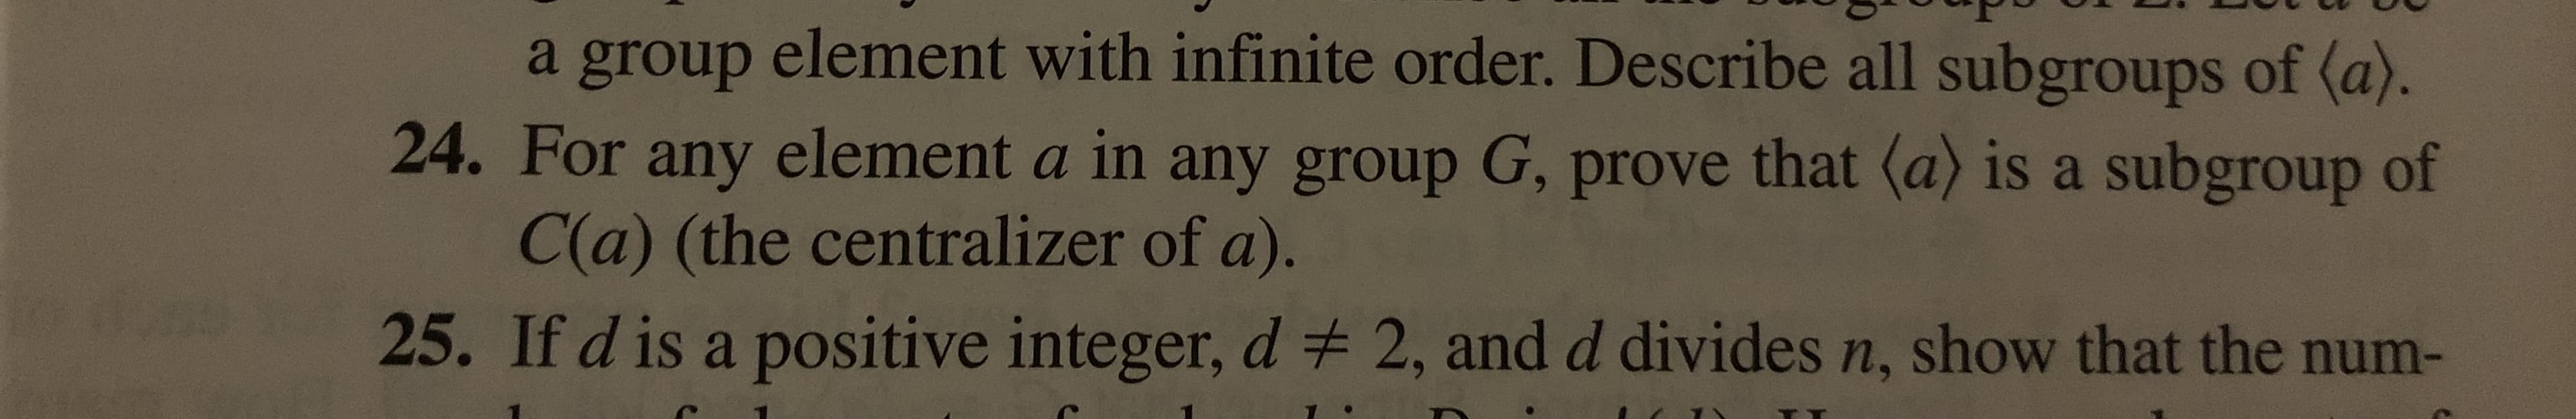 a group element with infinite order. Describe all subgroups of (a).
24. For any element a in any group G, prove that (a) is a subgroup of
C(a) (the centralizer of a).
25. If d is a positive integer, d # 2, and d divides n, show that the num-
